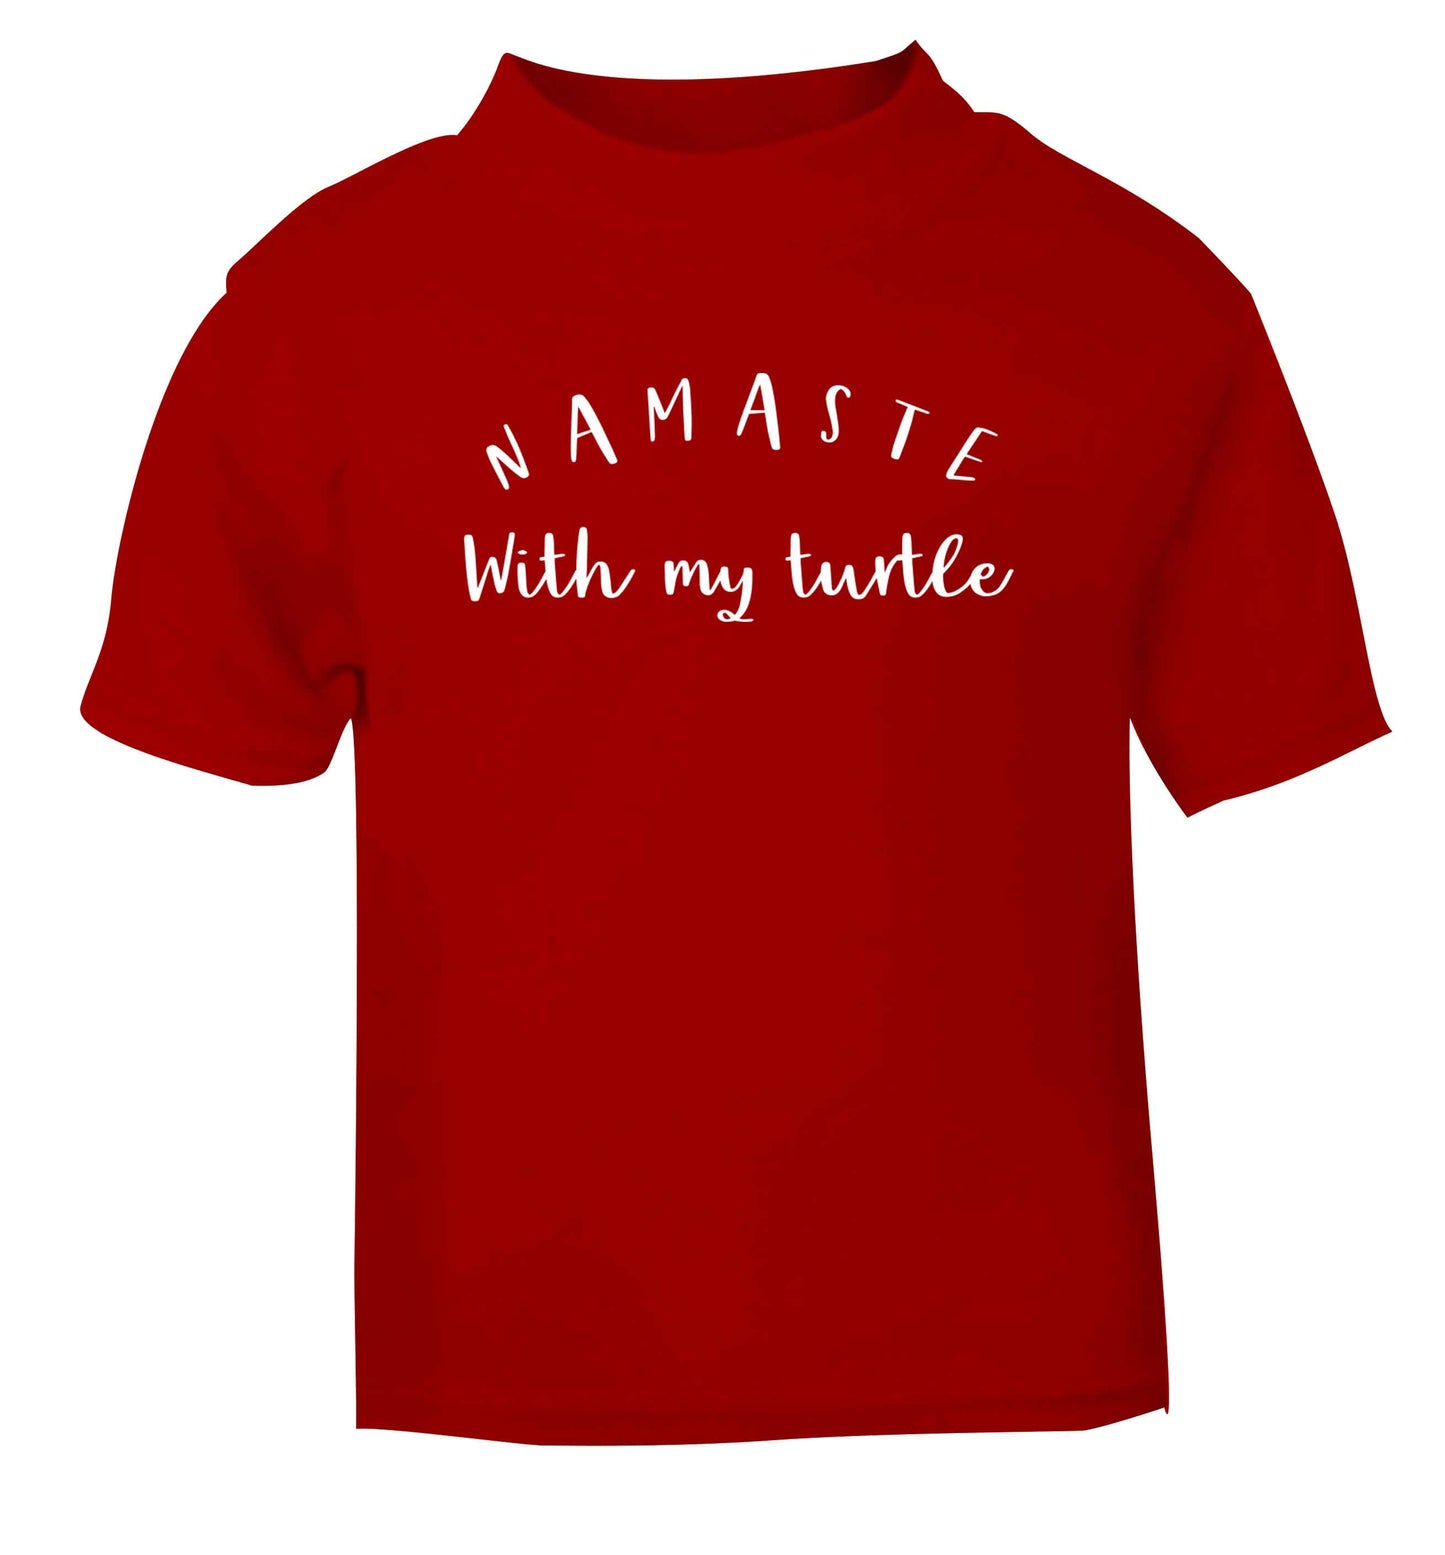 Namaste with my turtle red Baby Toddler Tshirt 2 Years